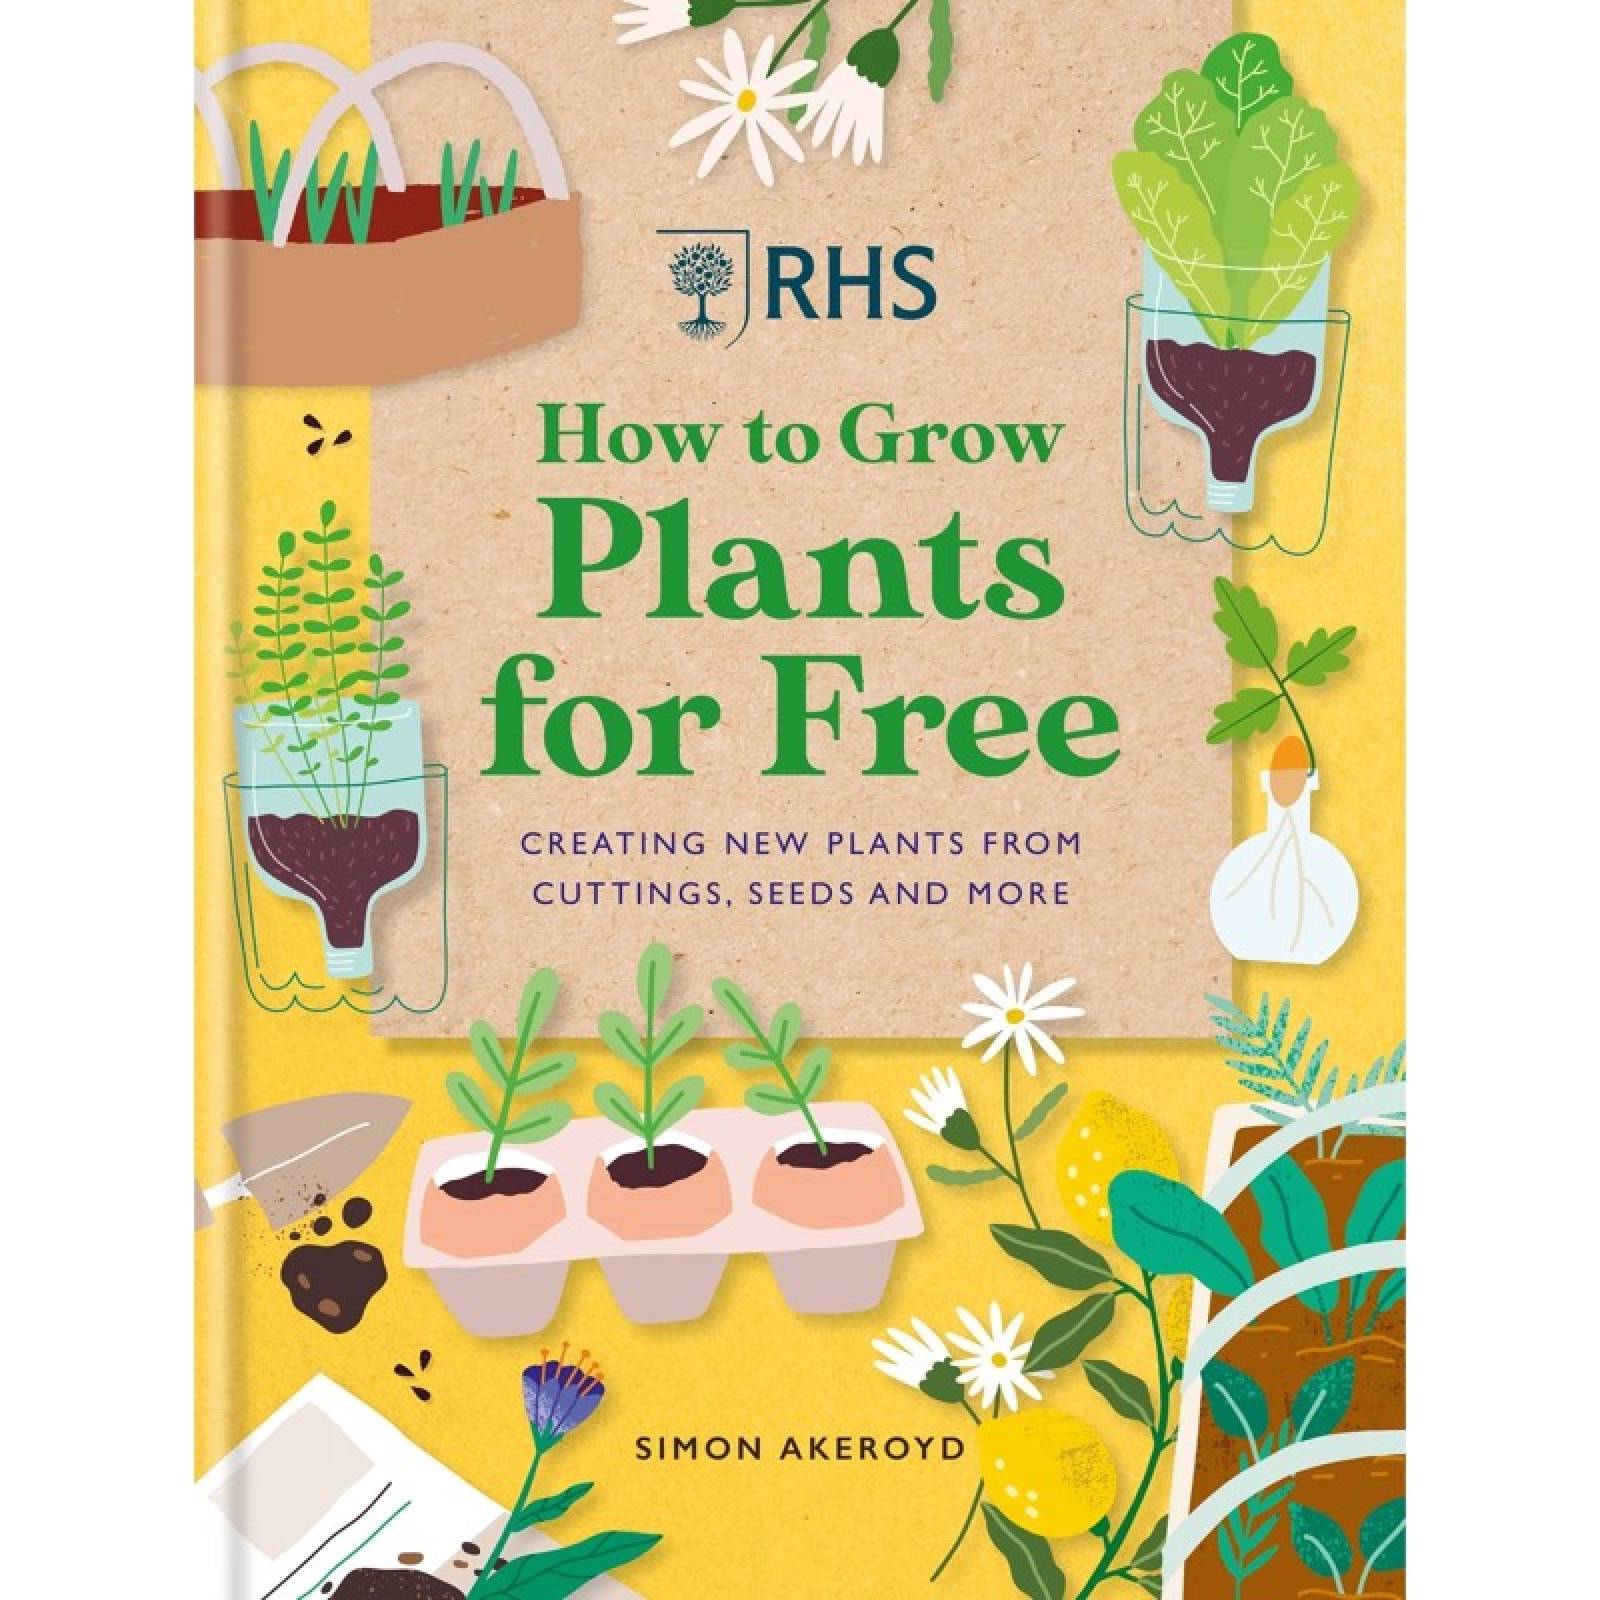 How To Grow Plants For Free By Simon Akeroyd - Hardback Book